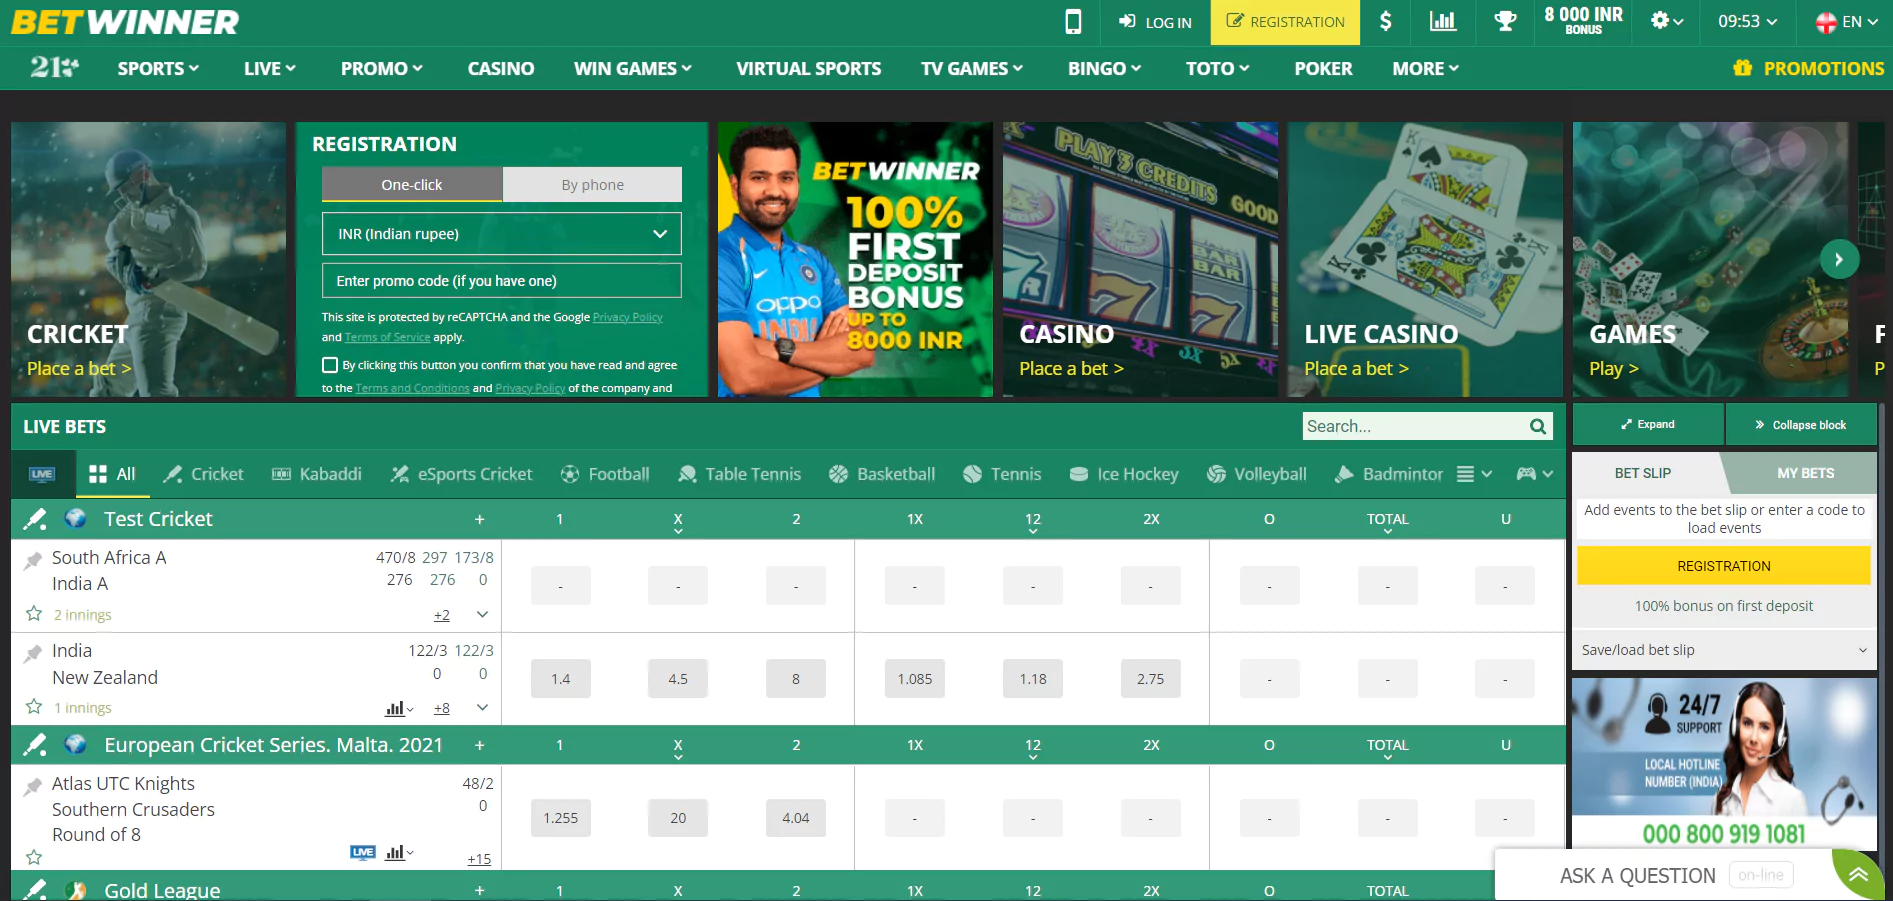 Home page of sports betting, with a free first bet at the Betwinner bookmaker